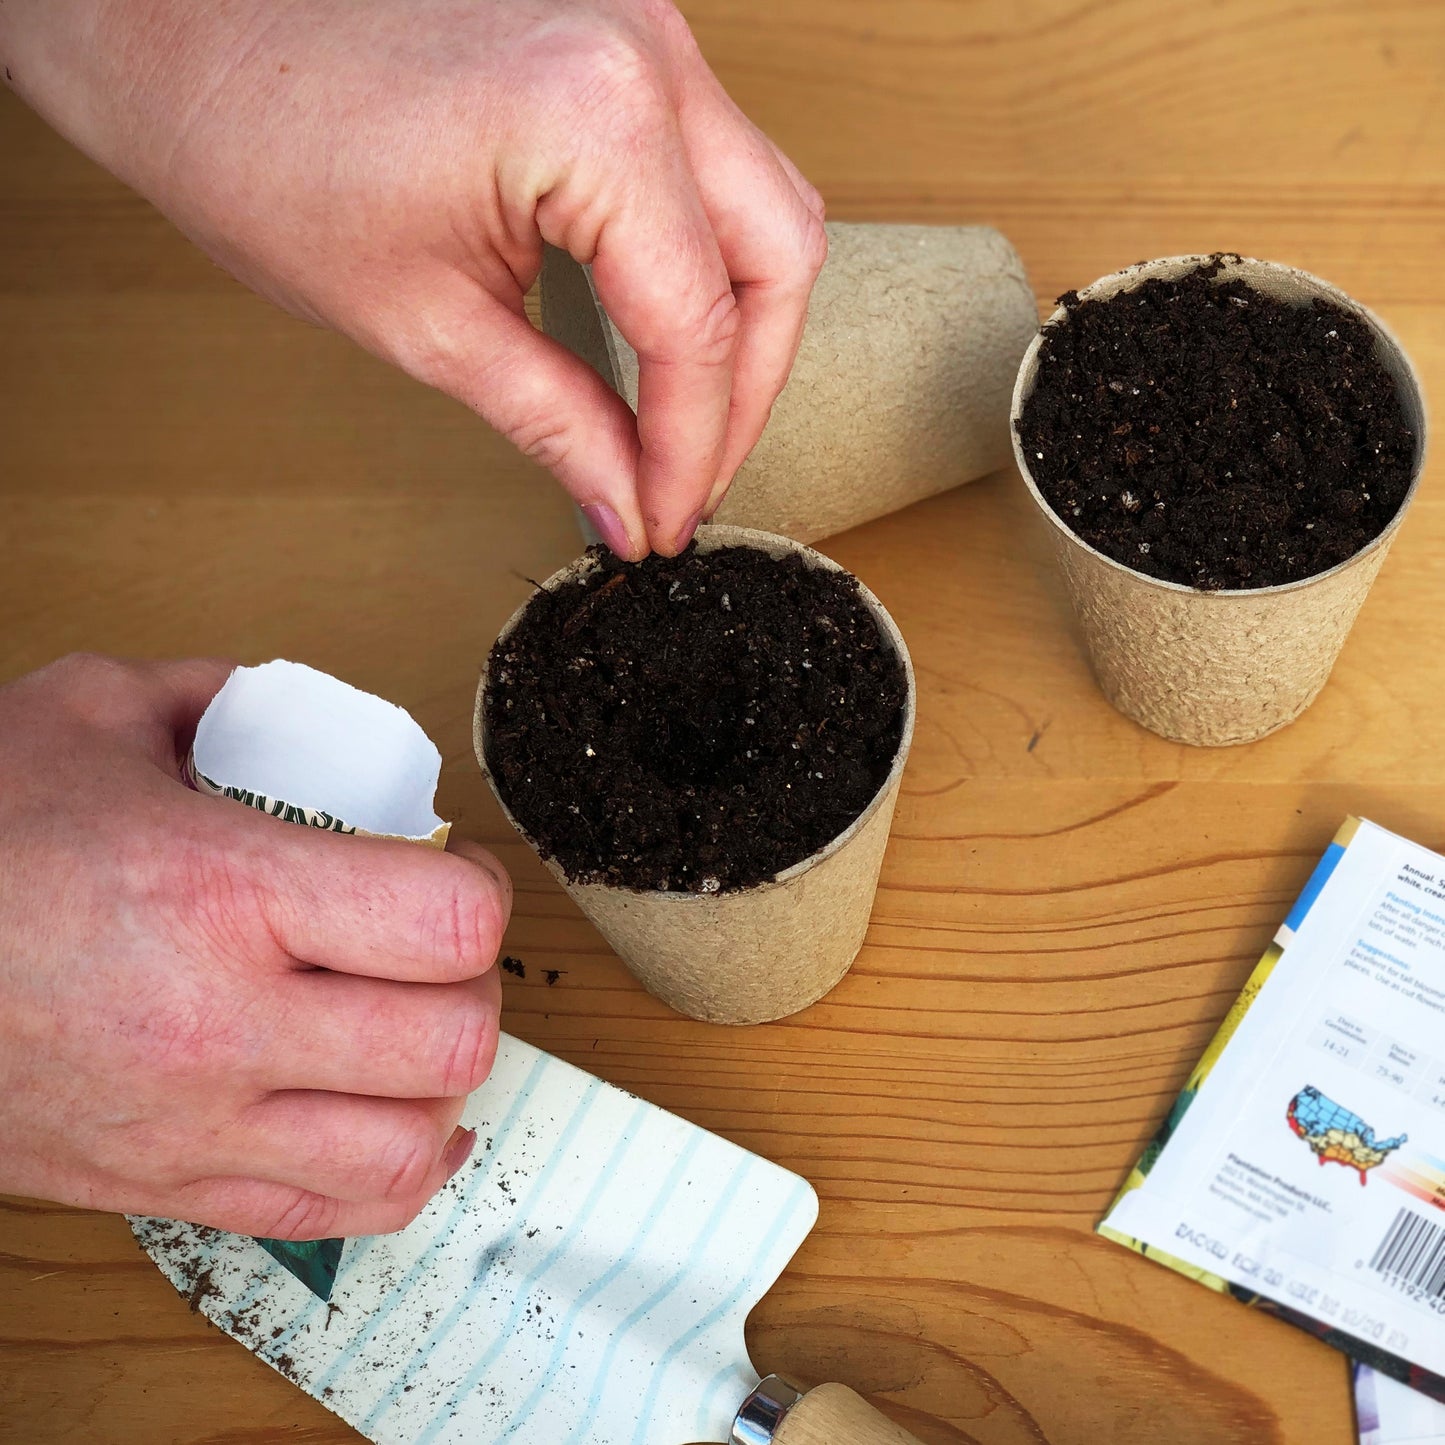 Start your Fordhook Giant Swiss Chard seeds in biodegradable peat pots or paper pots.